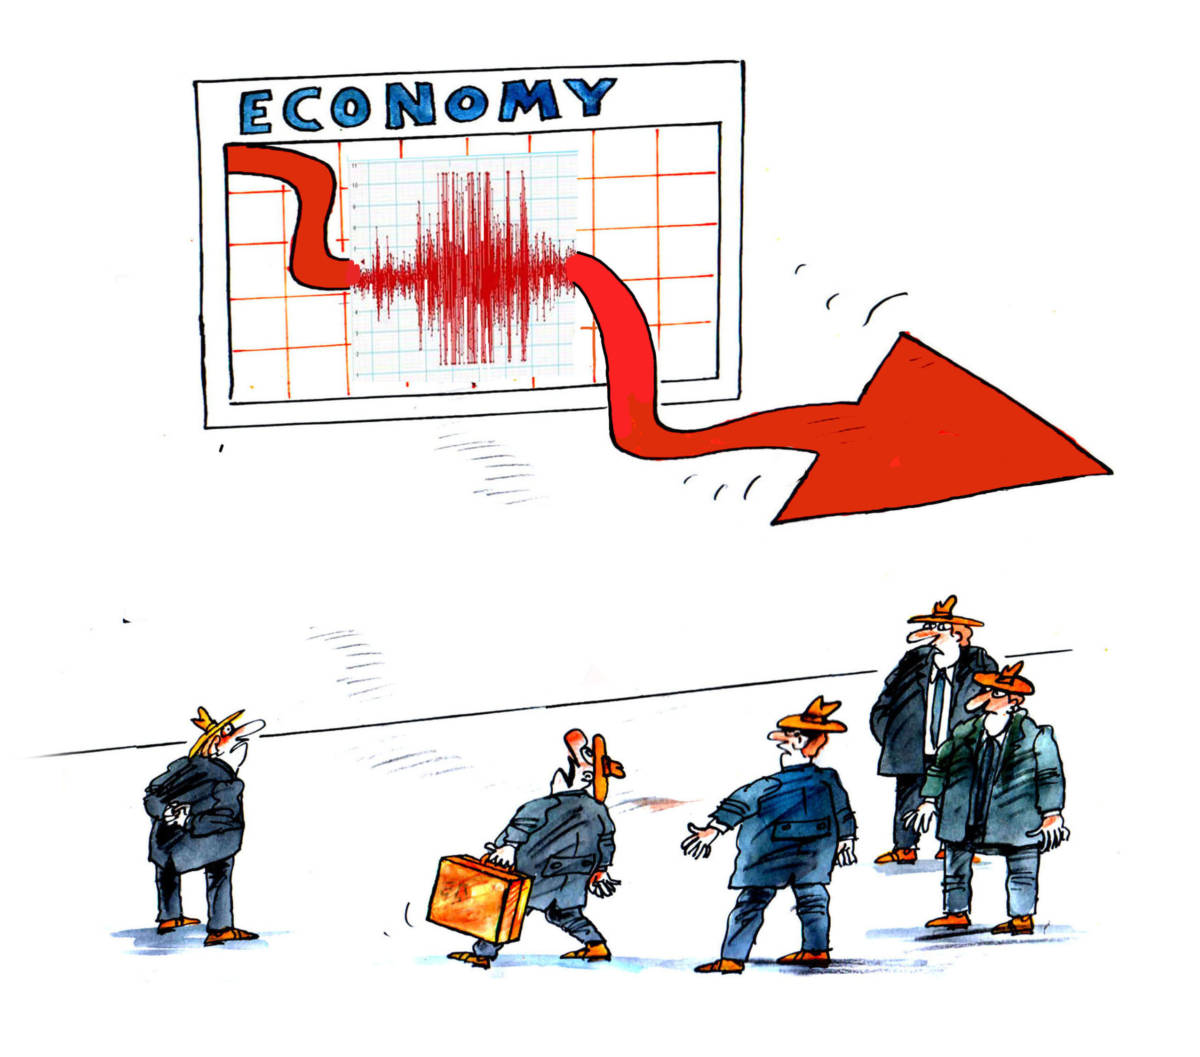 Economic earthquake, Pavel Constantin, southern Utah, Utah, St. George, The Independent, Earthquake,economy,crisis,scholarship,money,profit,business,people,graphic,bank,politic